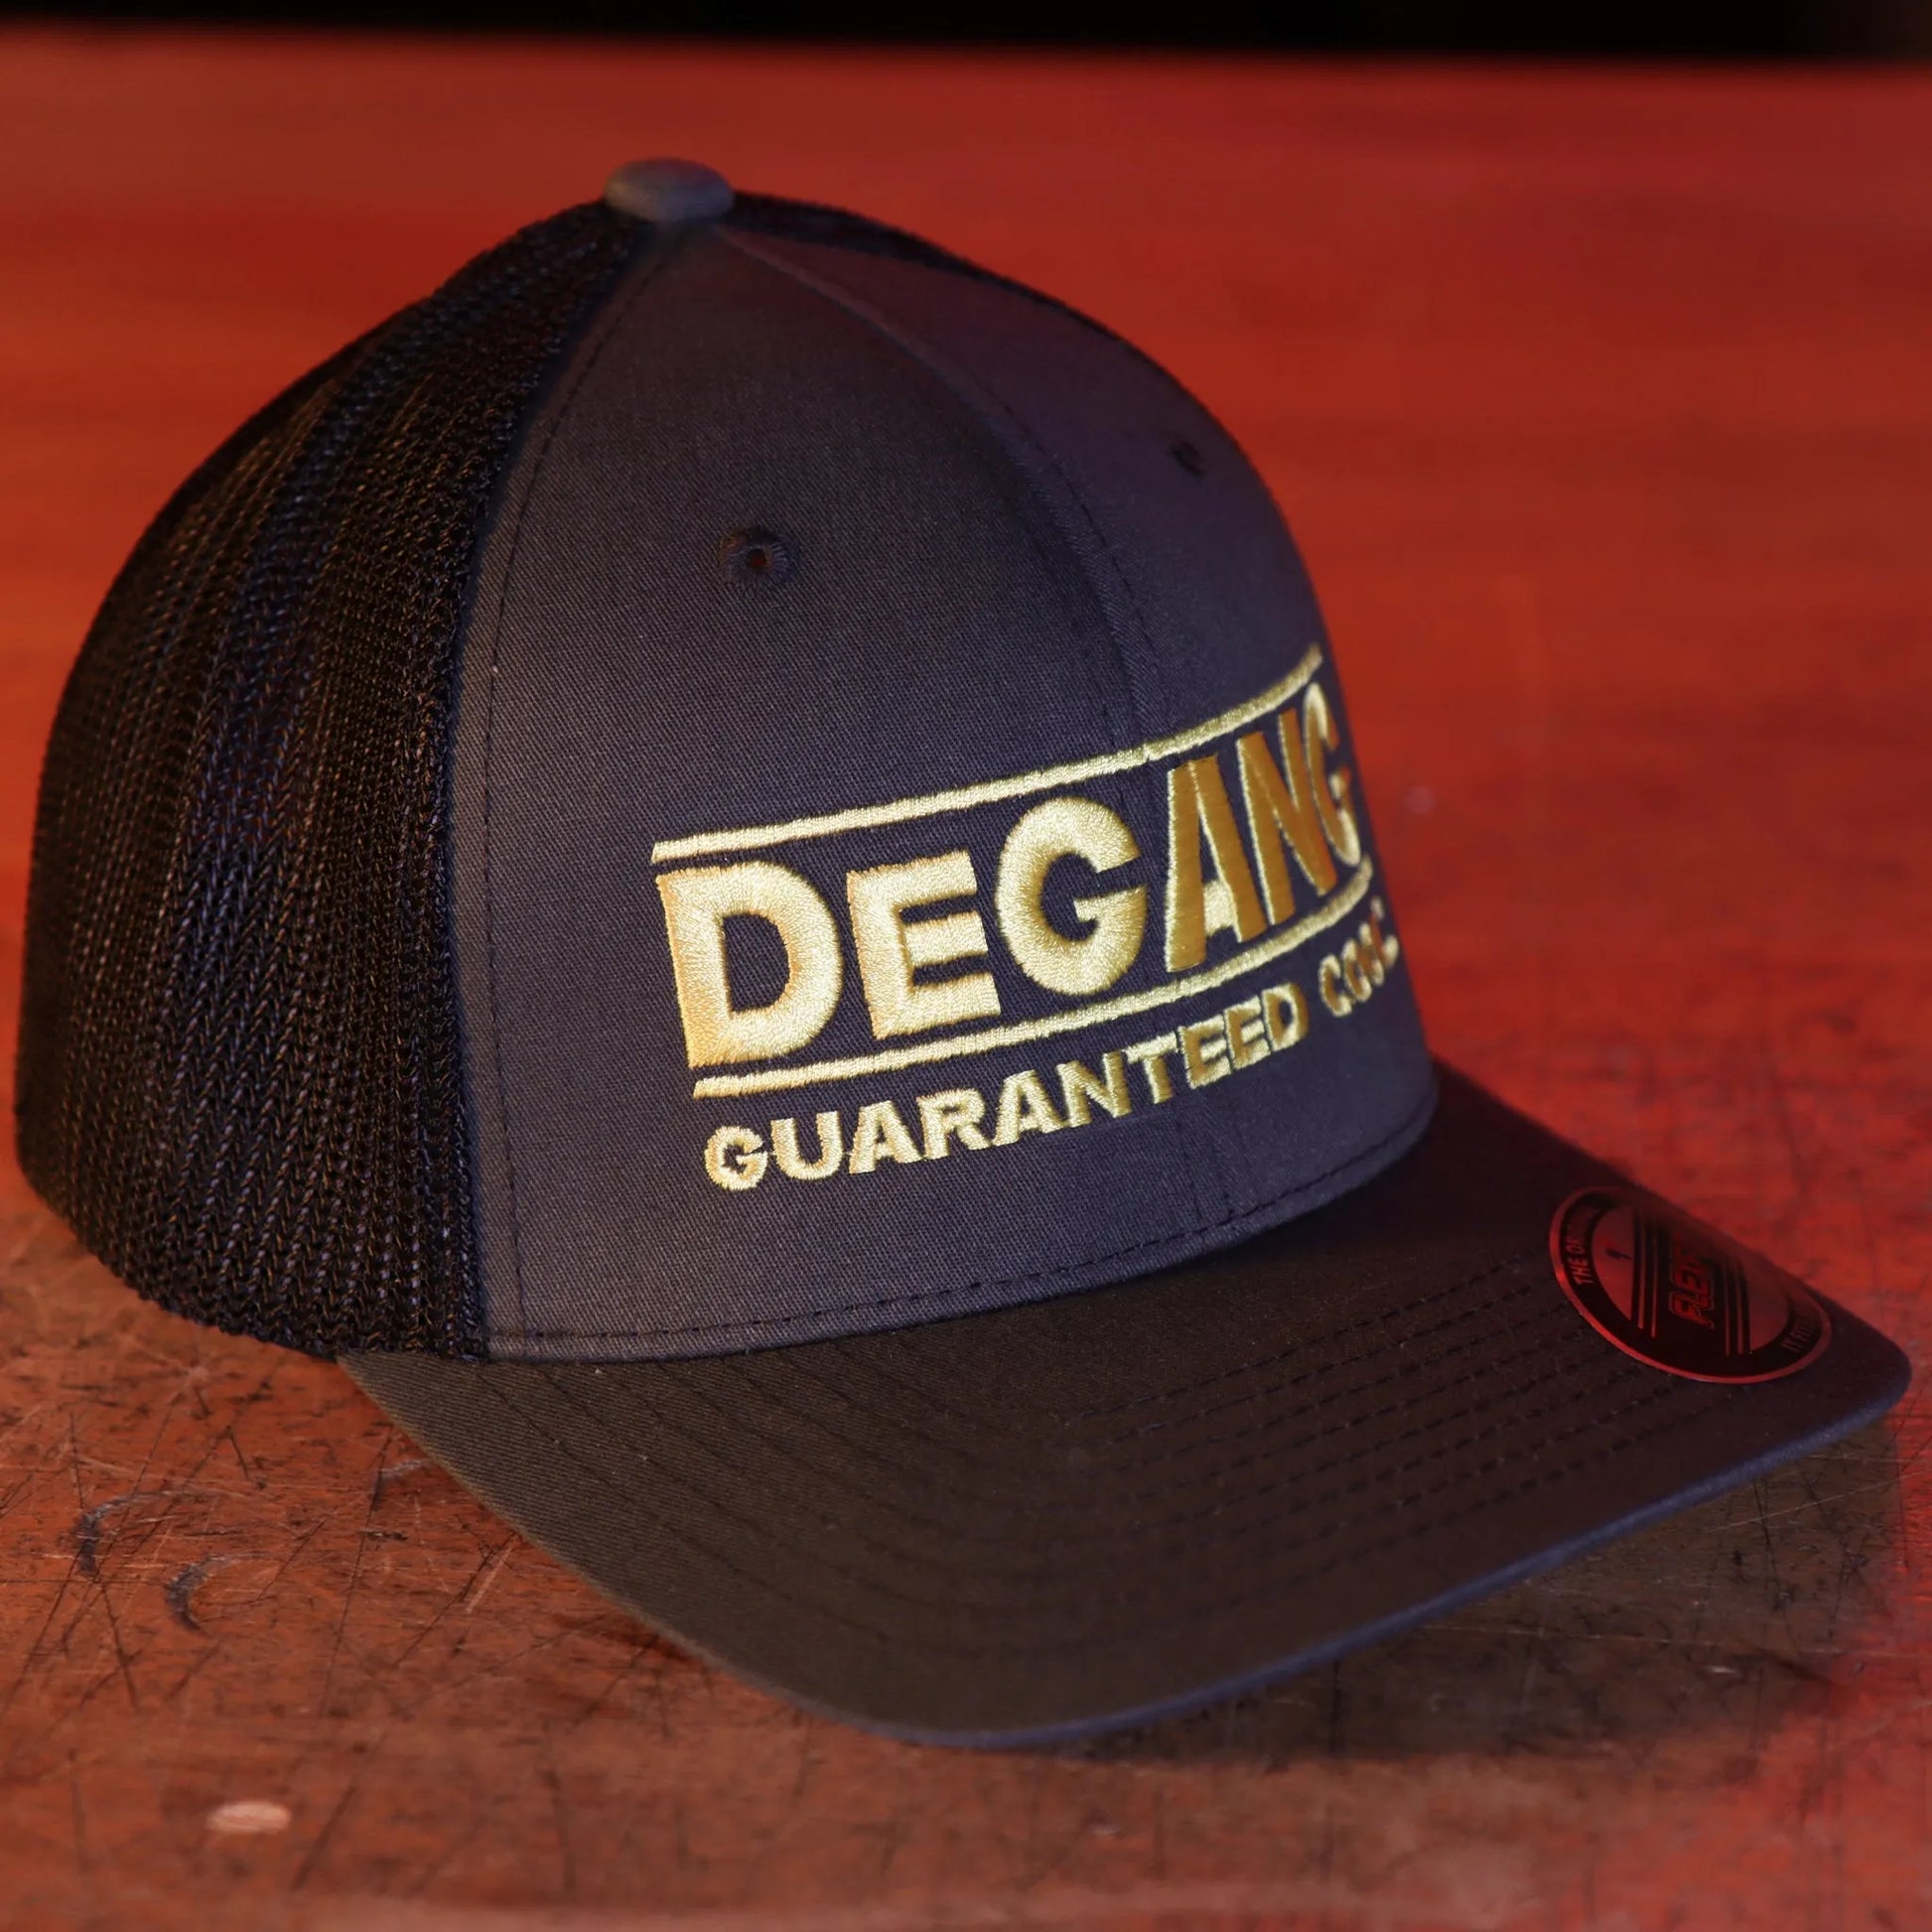 DeGANG GUARANTEED COOL in yellow gold color on 2 tone grey and black FLEXFIT TRUCKER MESH hat